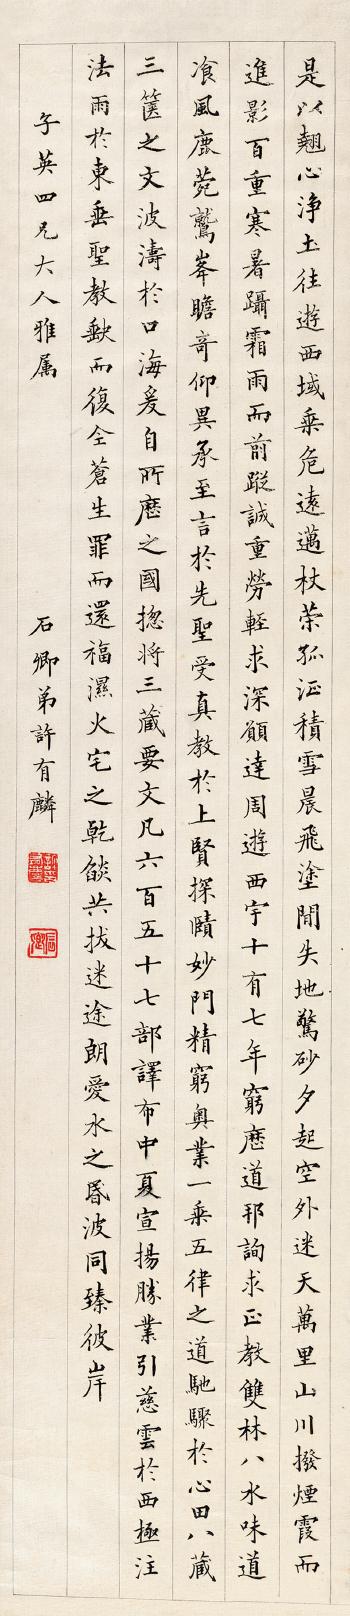 Calligraphy In Regular Script by 
																	 Xu Youling